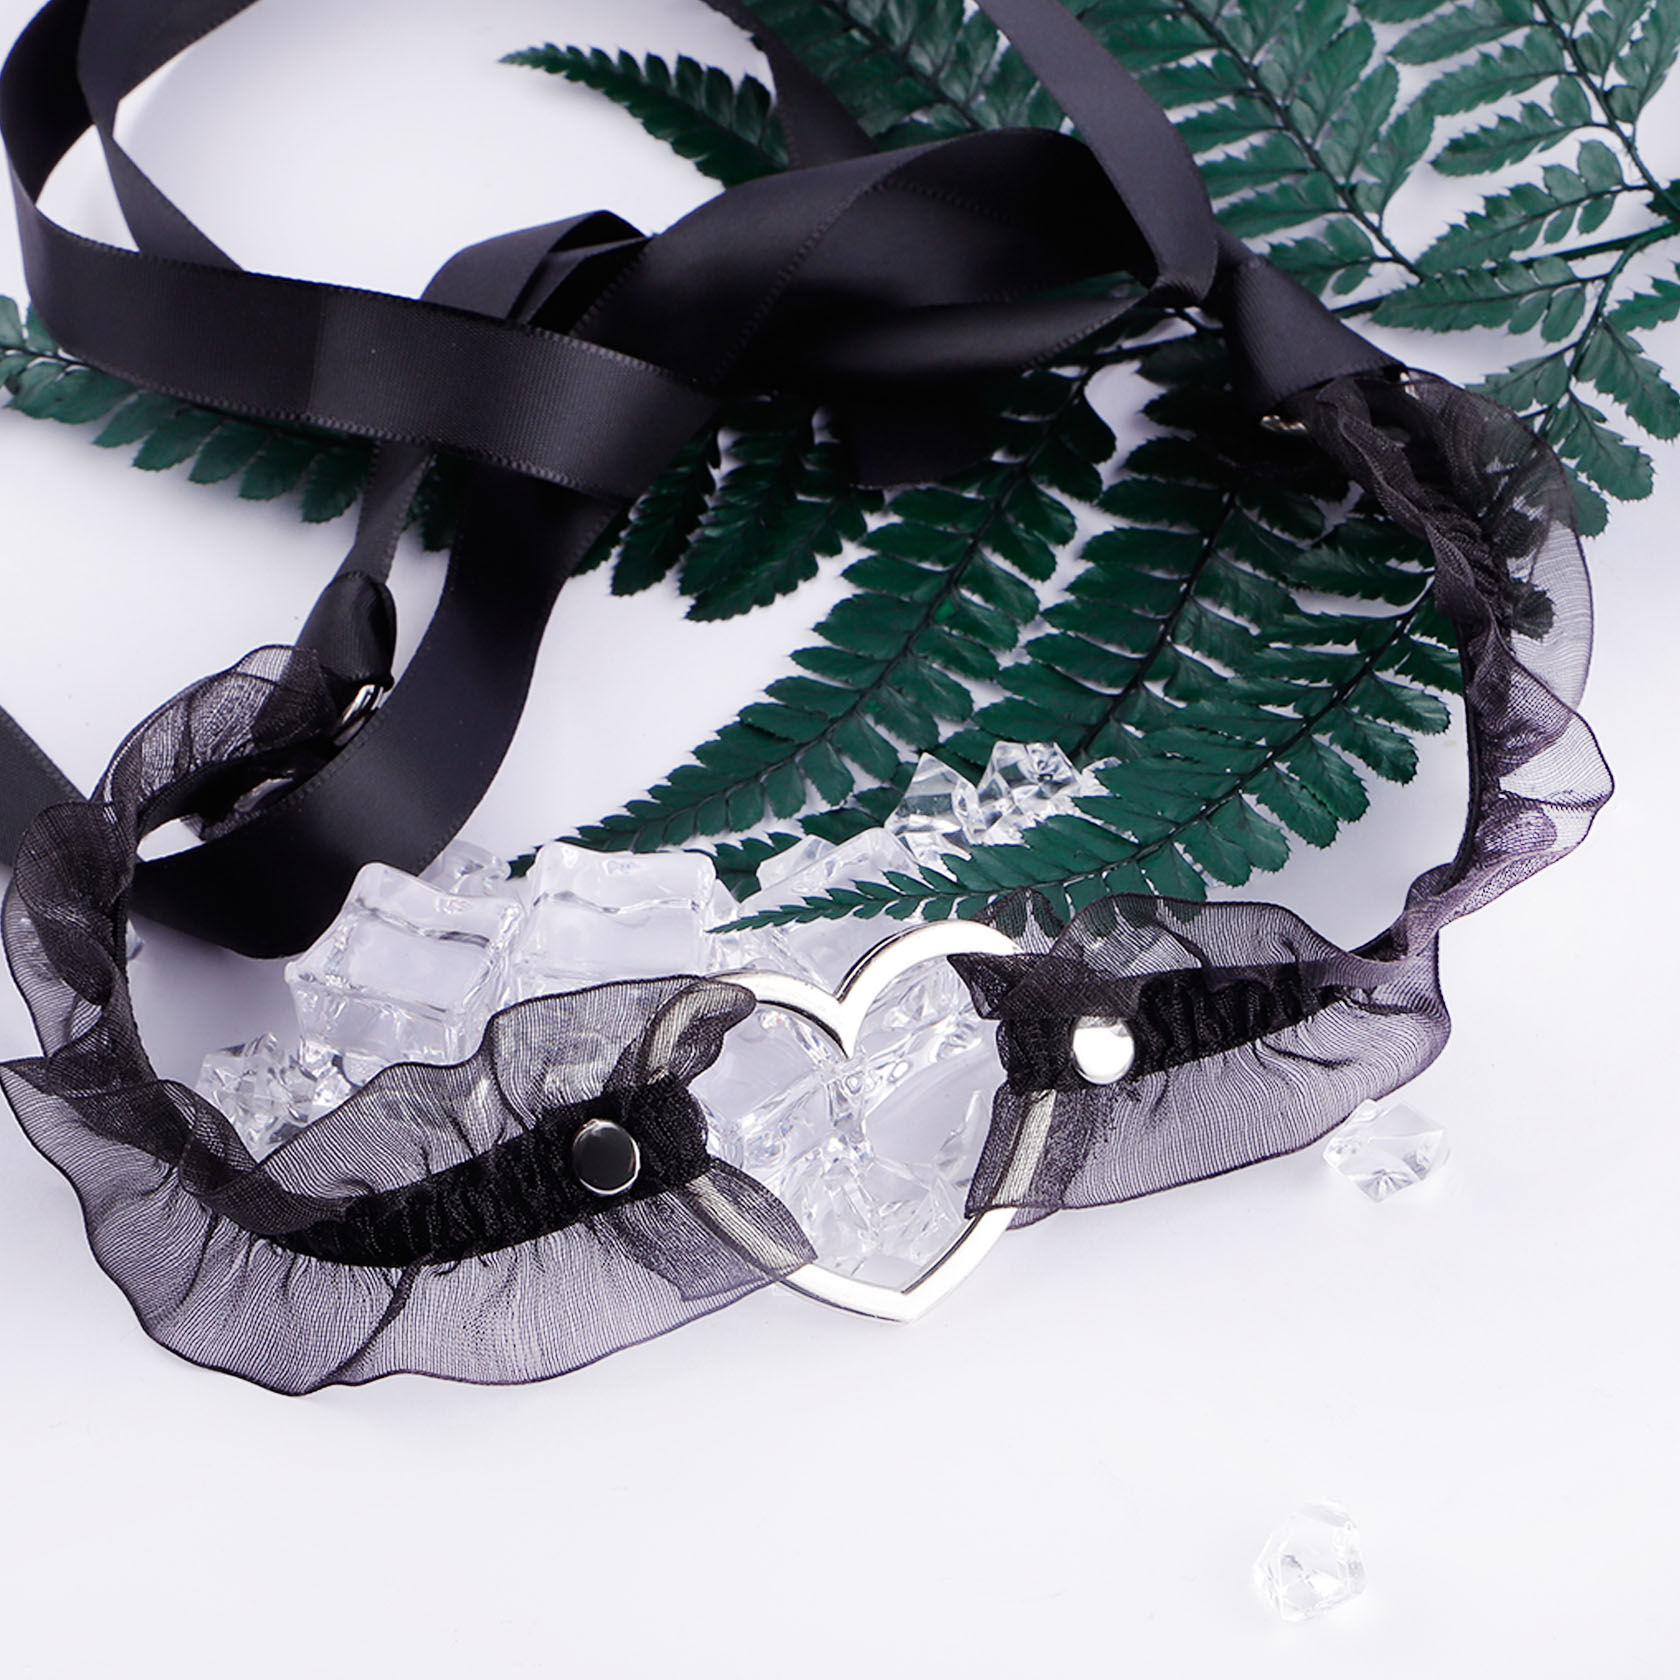 Elegant sexy gothic punk style heart ring choker necklace adjustable lace collar 